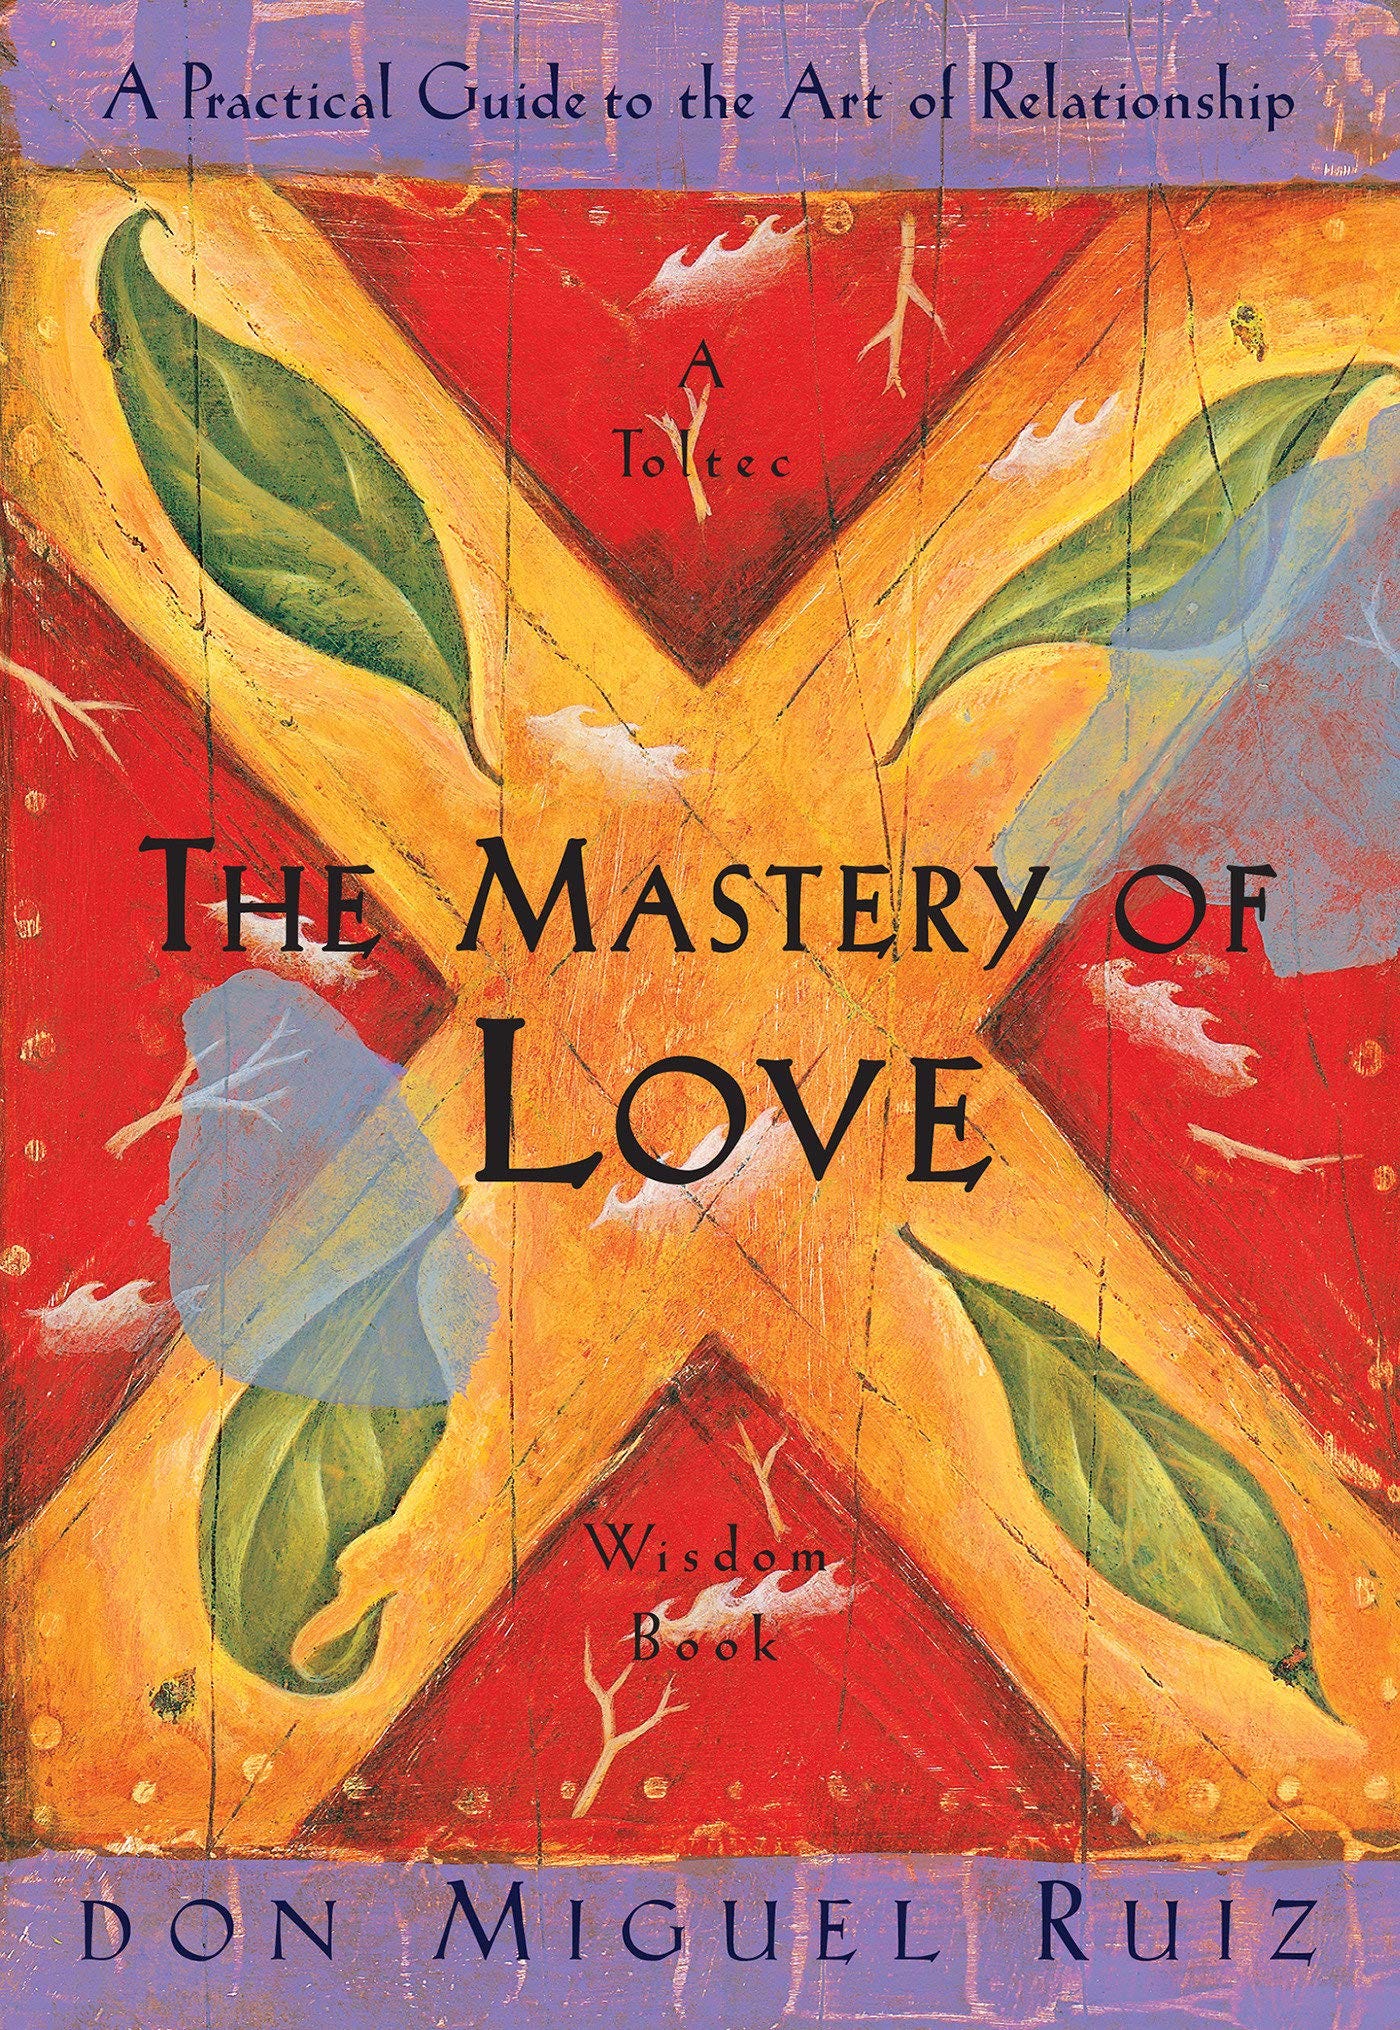 Amazon.com: The Mastery of Love: A Practical Guide to the Art of  Relationship: A Toltec Wisdom Book: 8580001059129: Don Miguel Ruiz, Janet  Mills: Libros